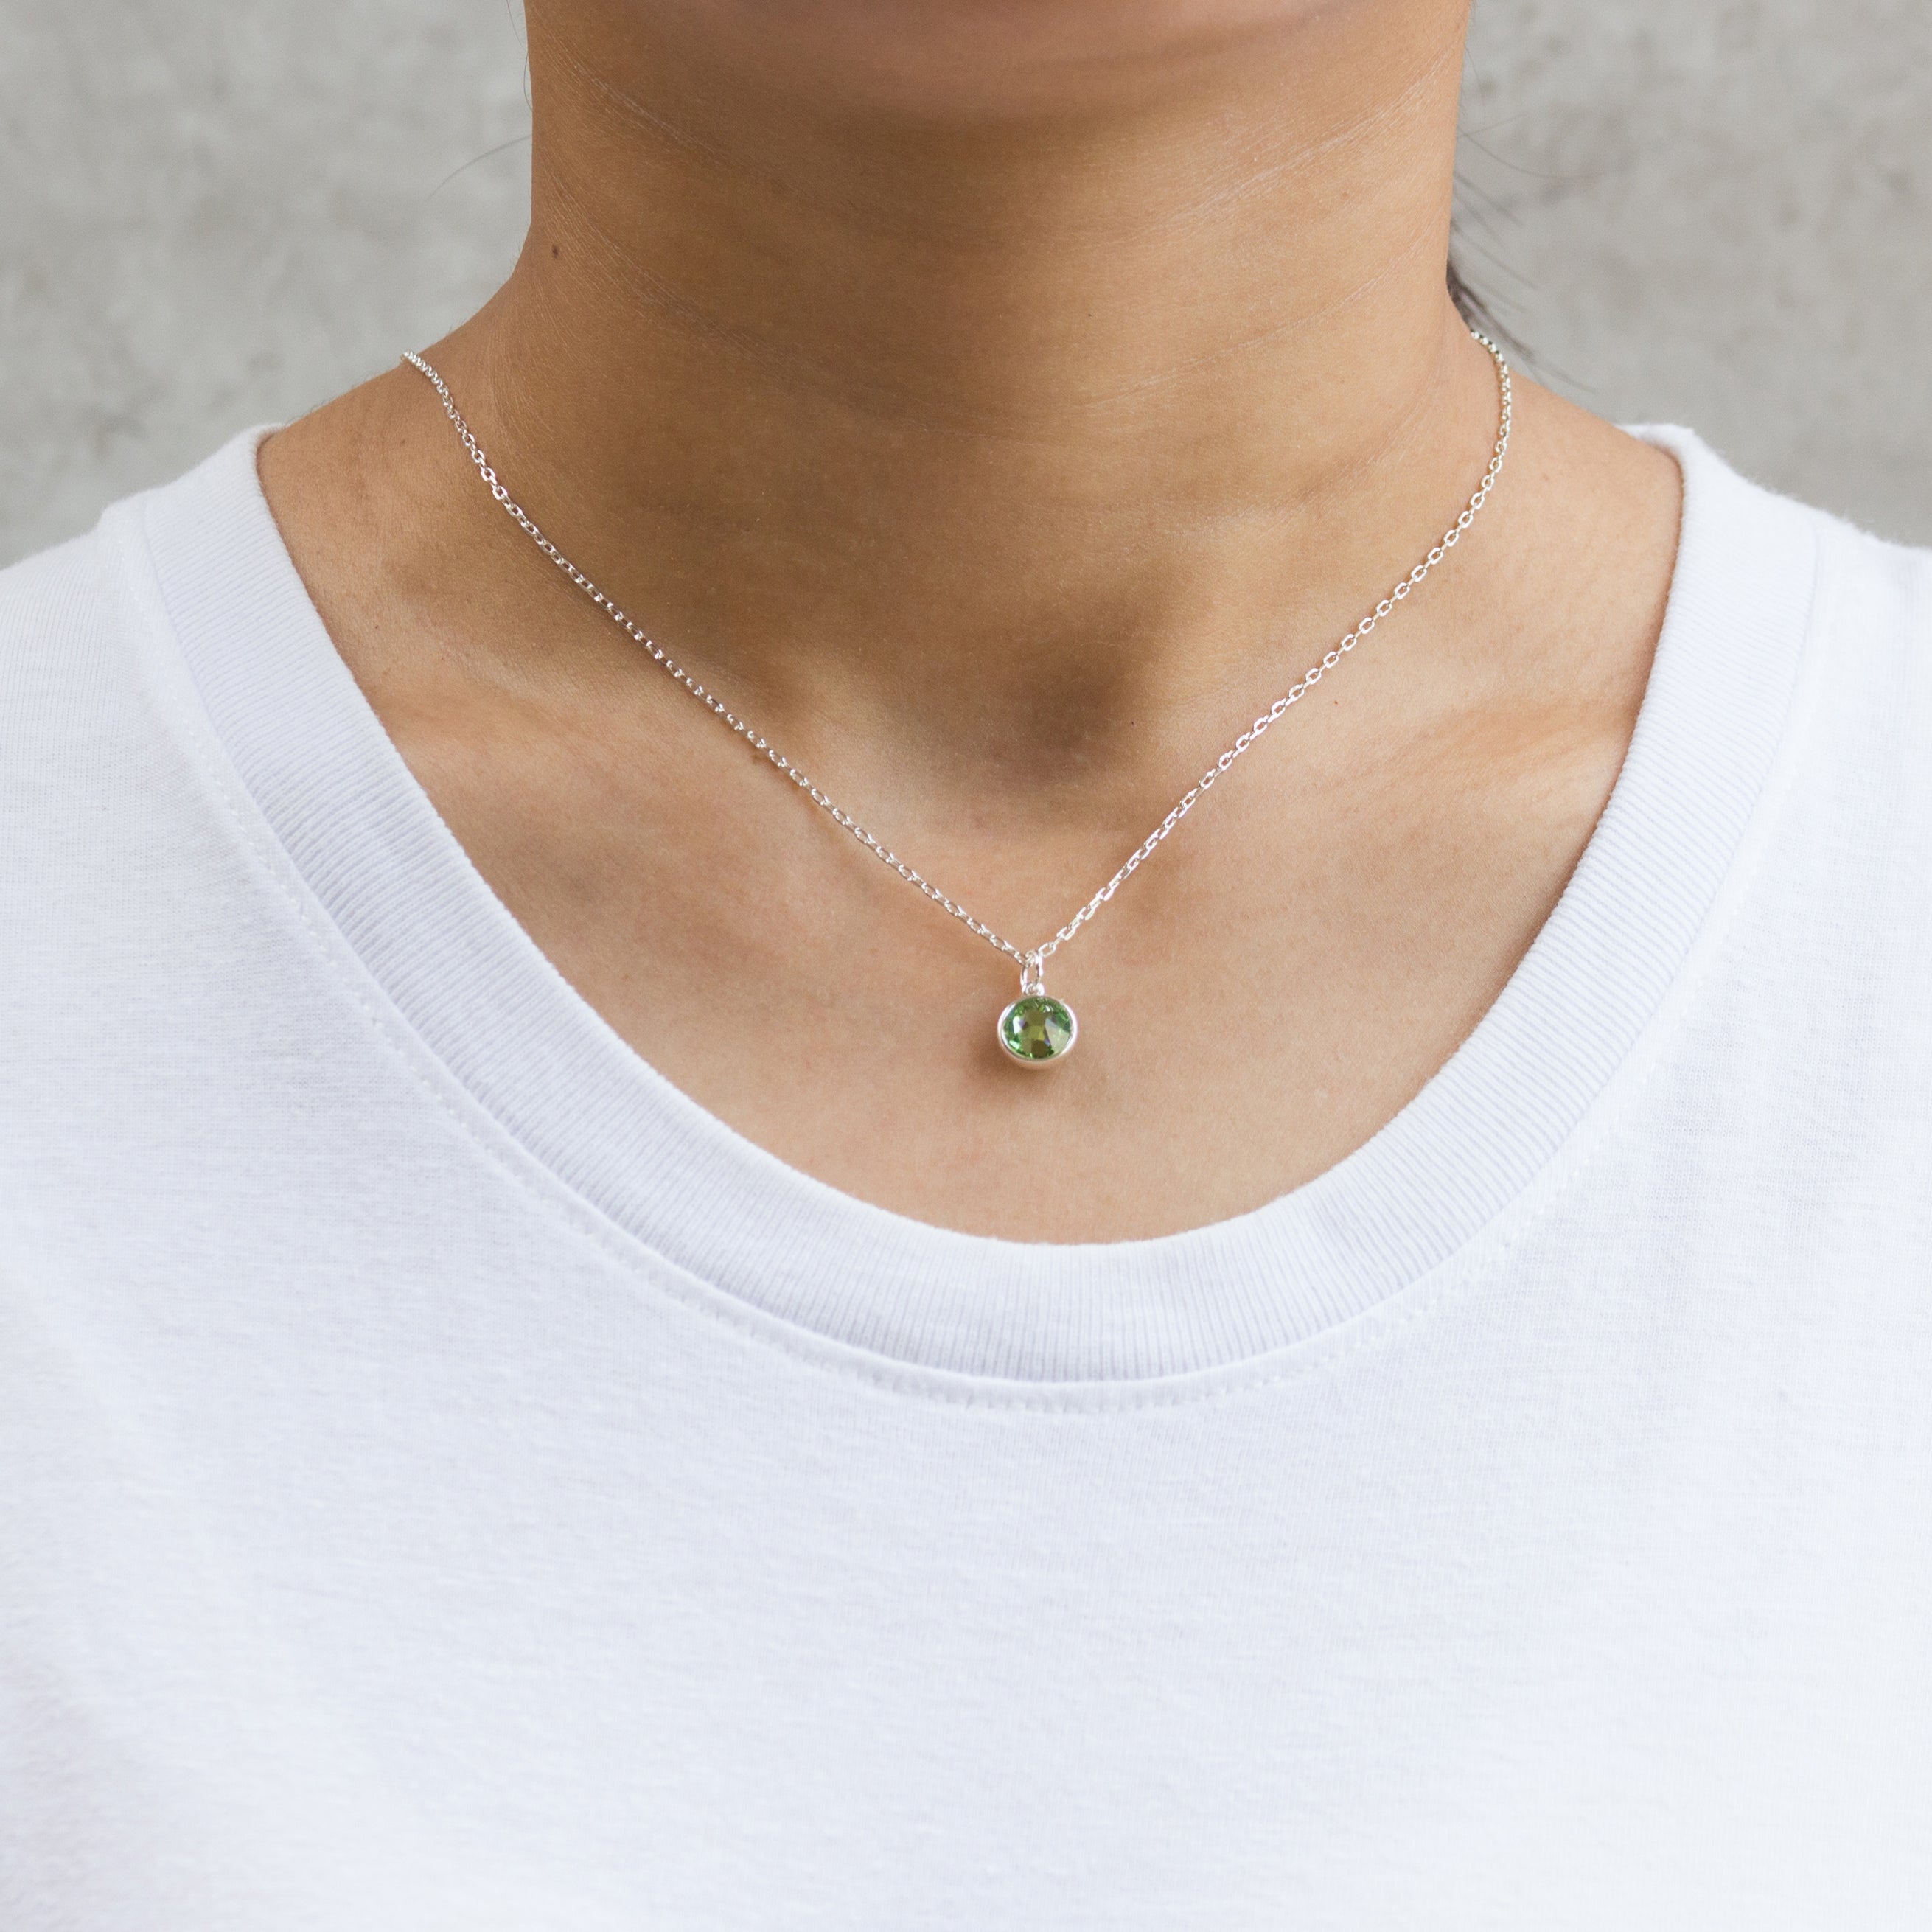 August (Peridot) Birthstone Necklace Created with Zircondia® Crystals